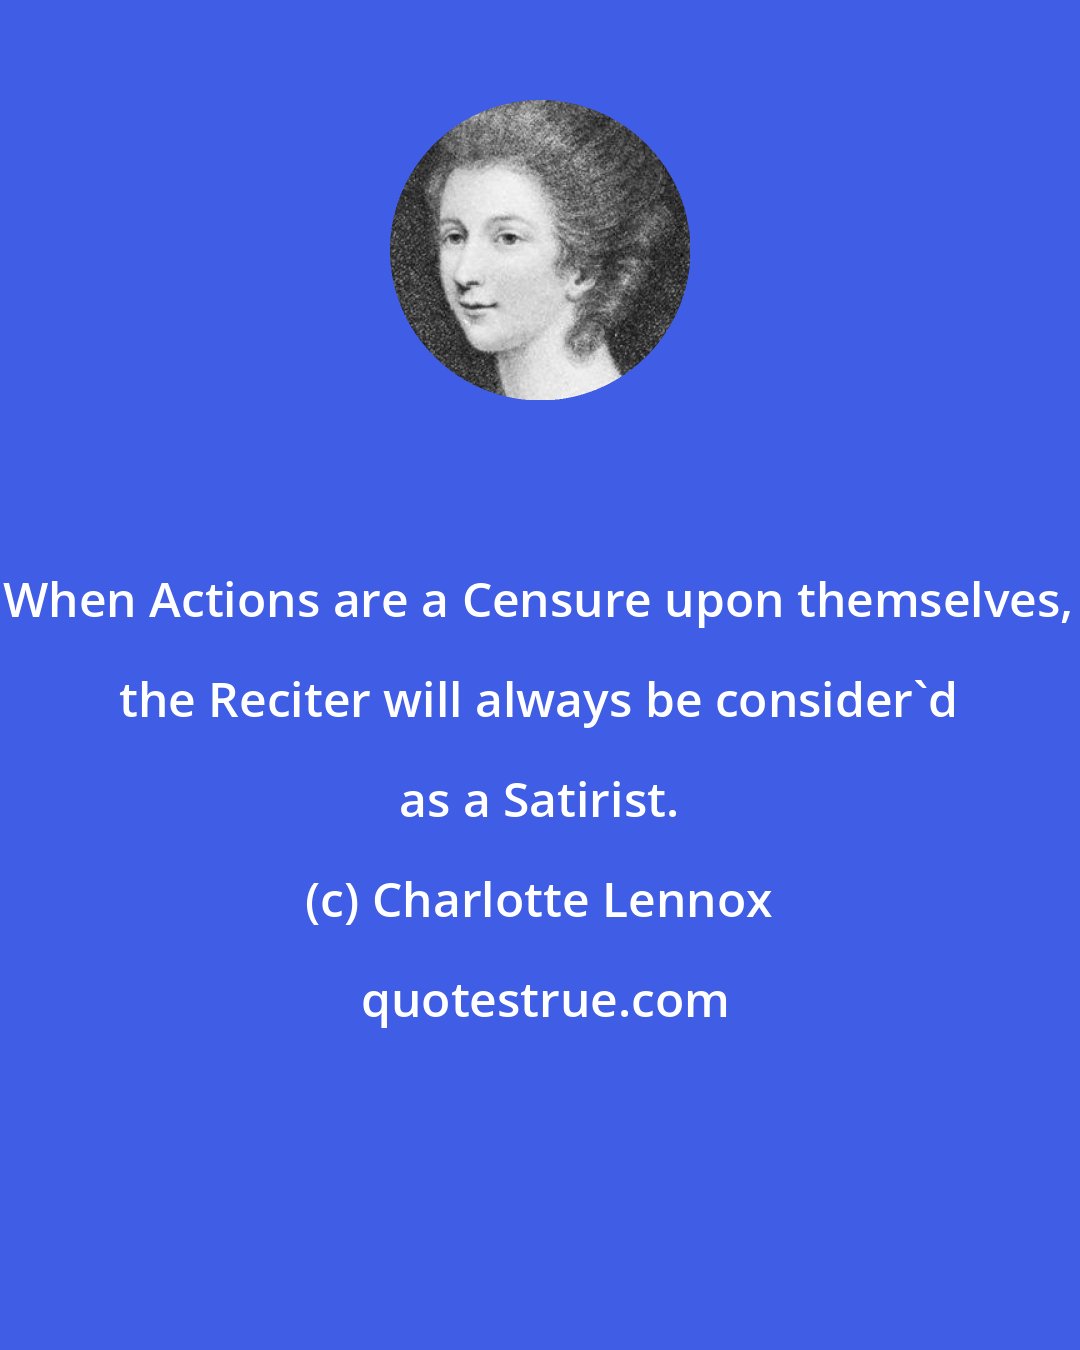 Charlotte Lennox: When Actions are a Censure upon themselves, the Reciter will always be consider'd as a Satirist.